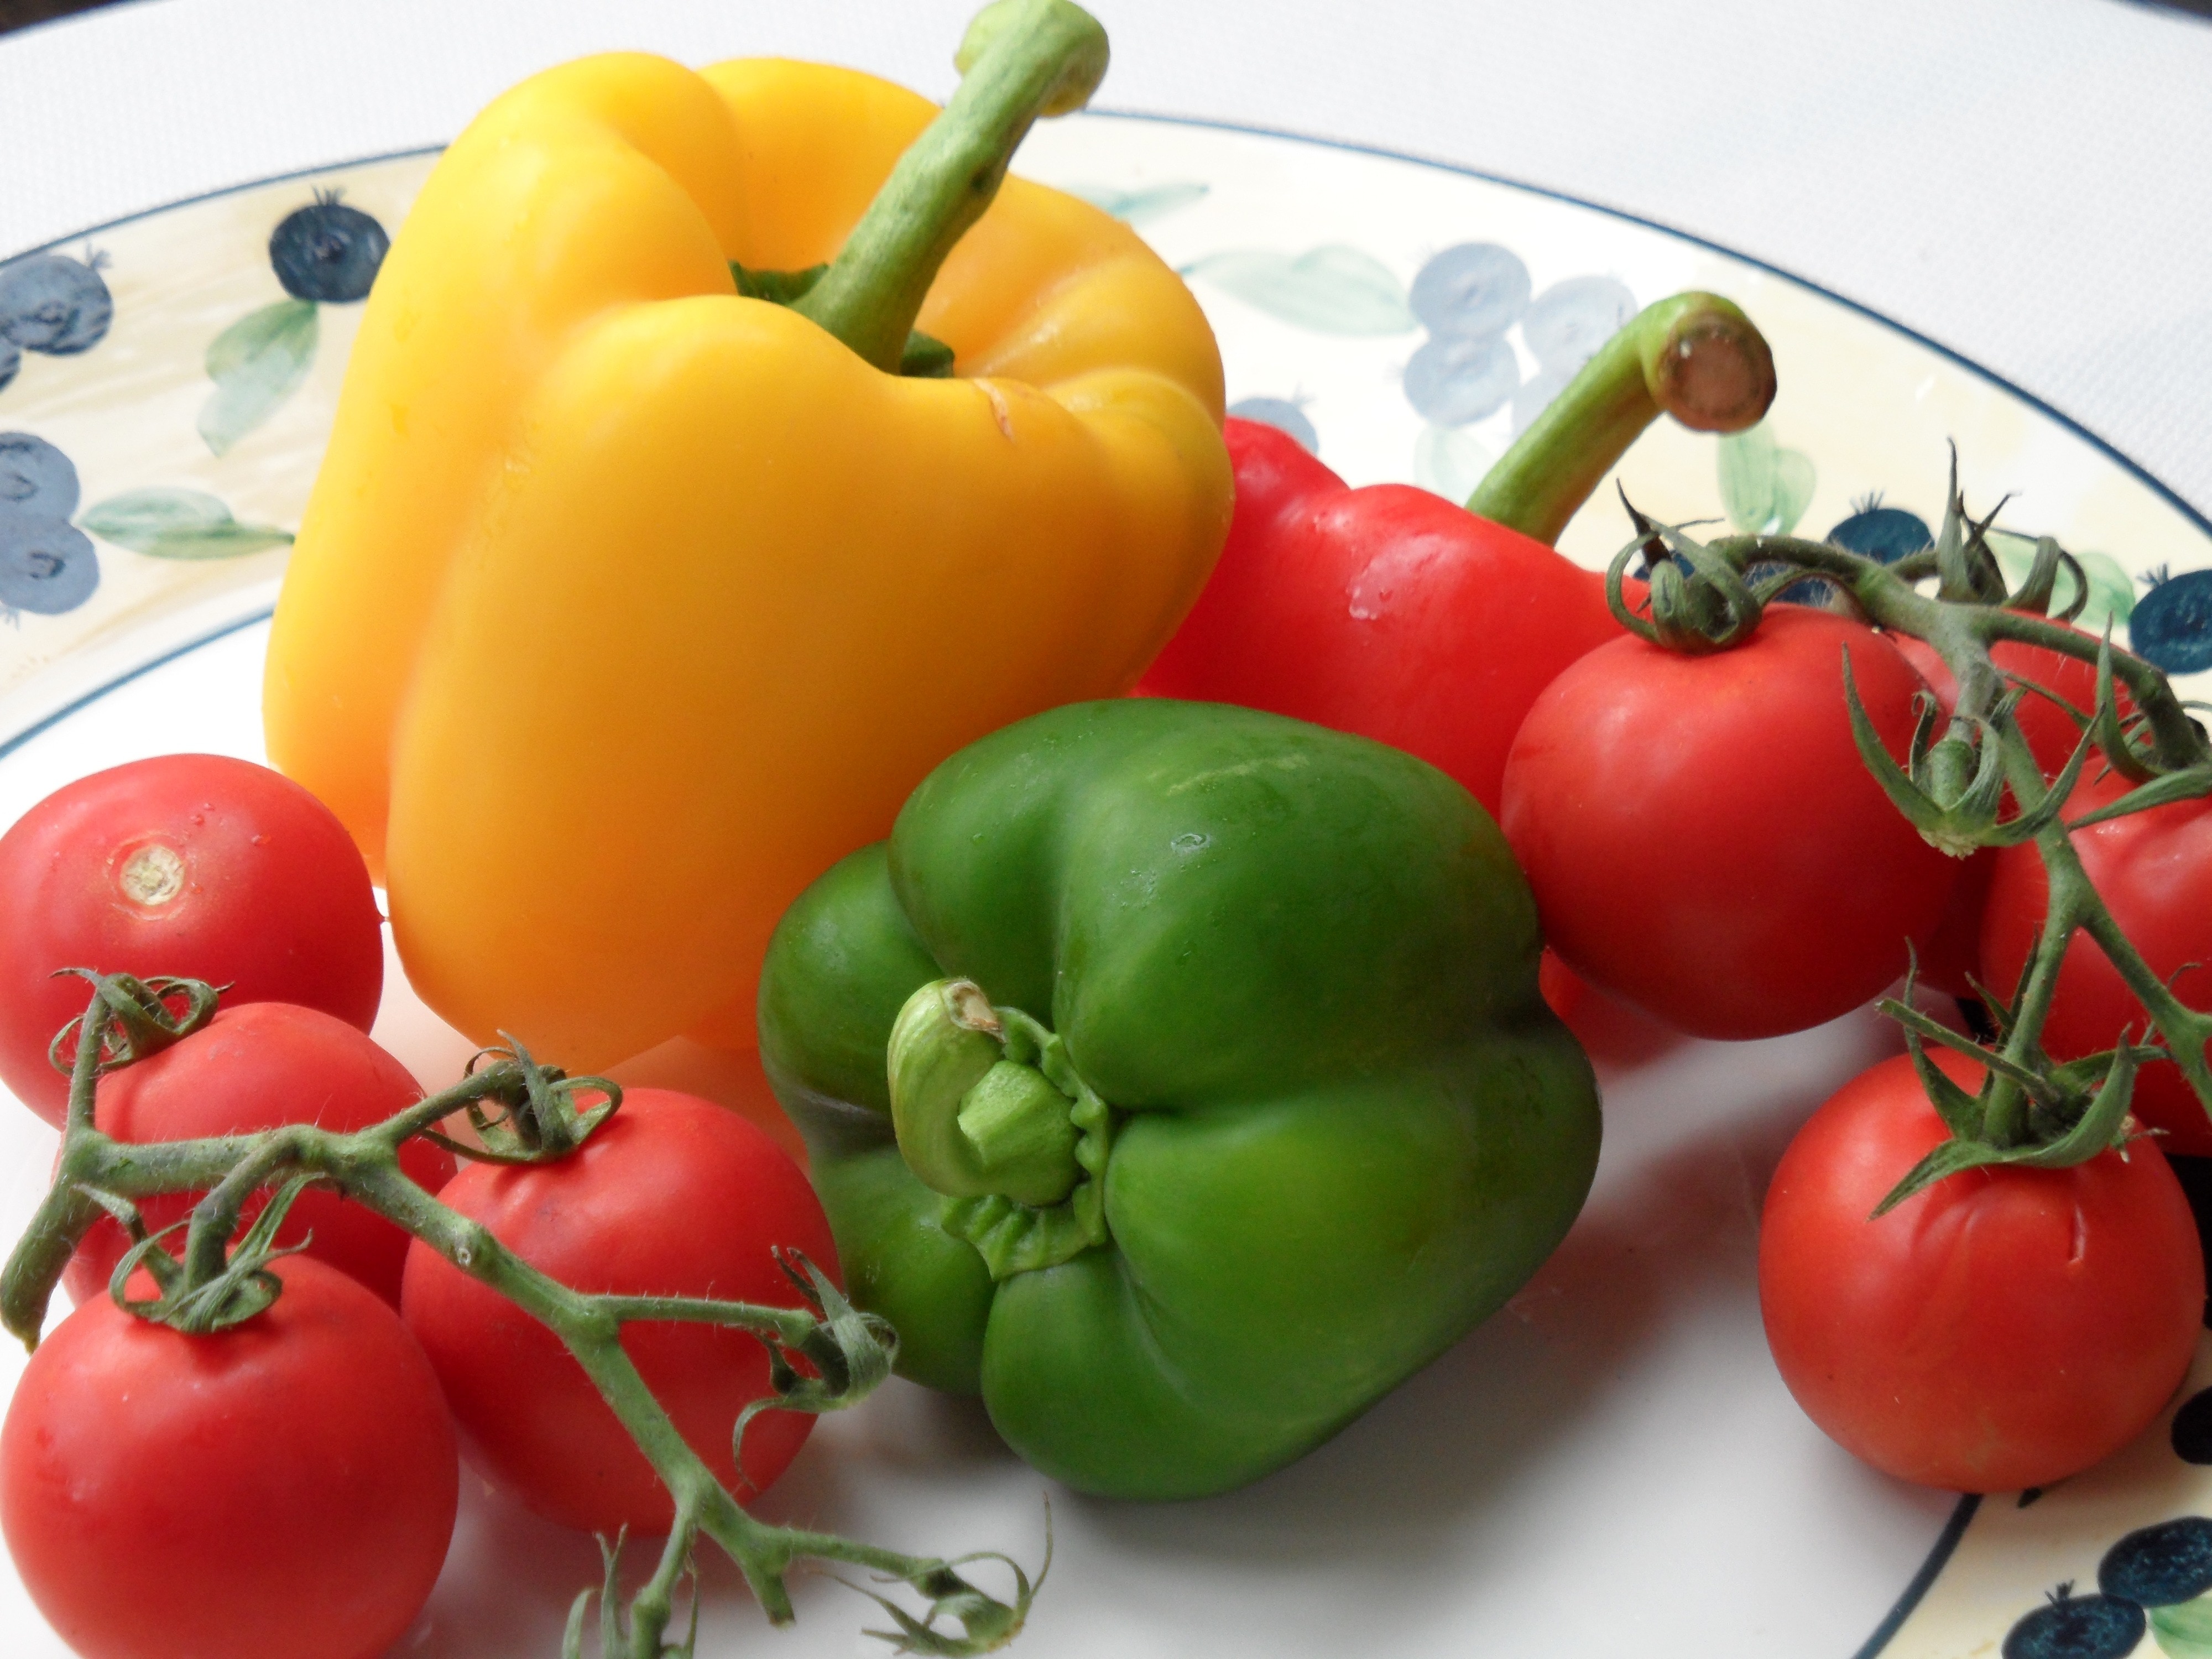 yellow red and green bell peppers with tomatoes  on white and blue ceramic plate